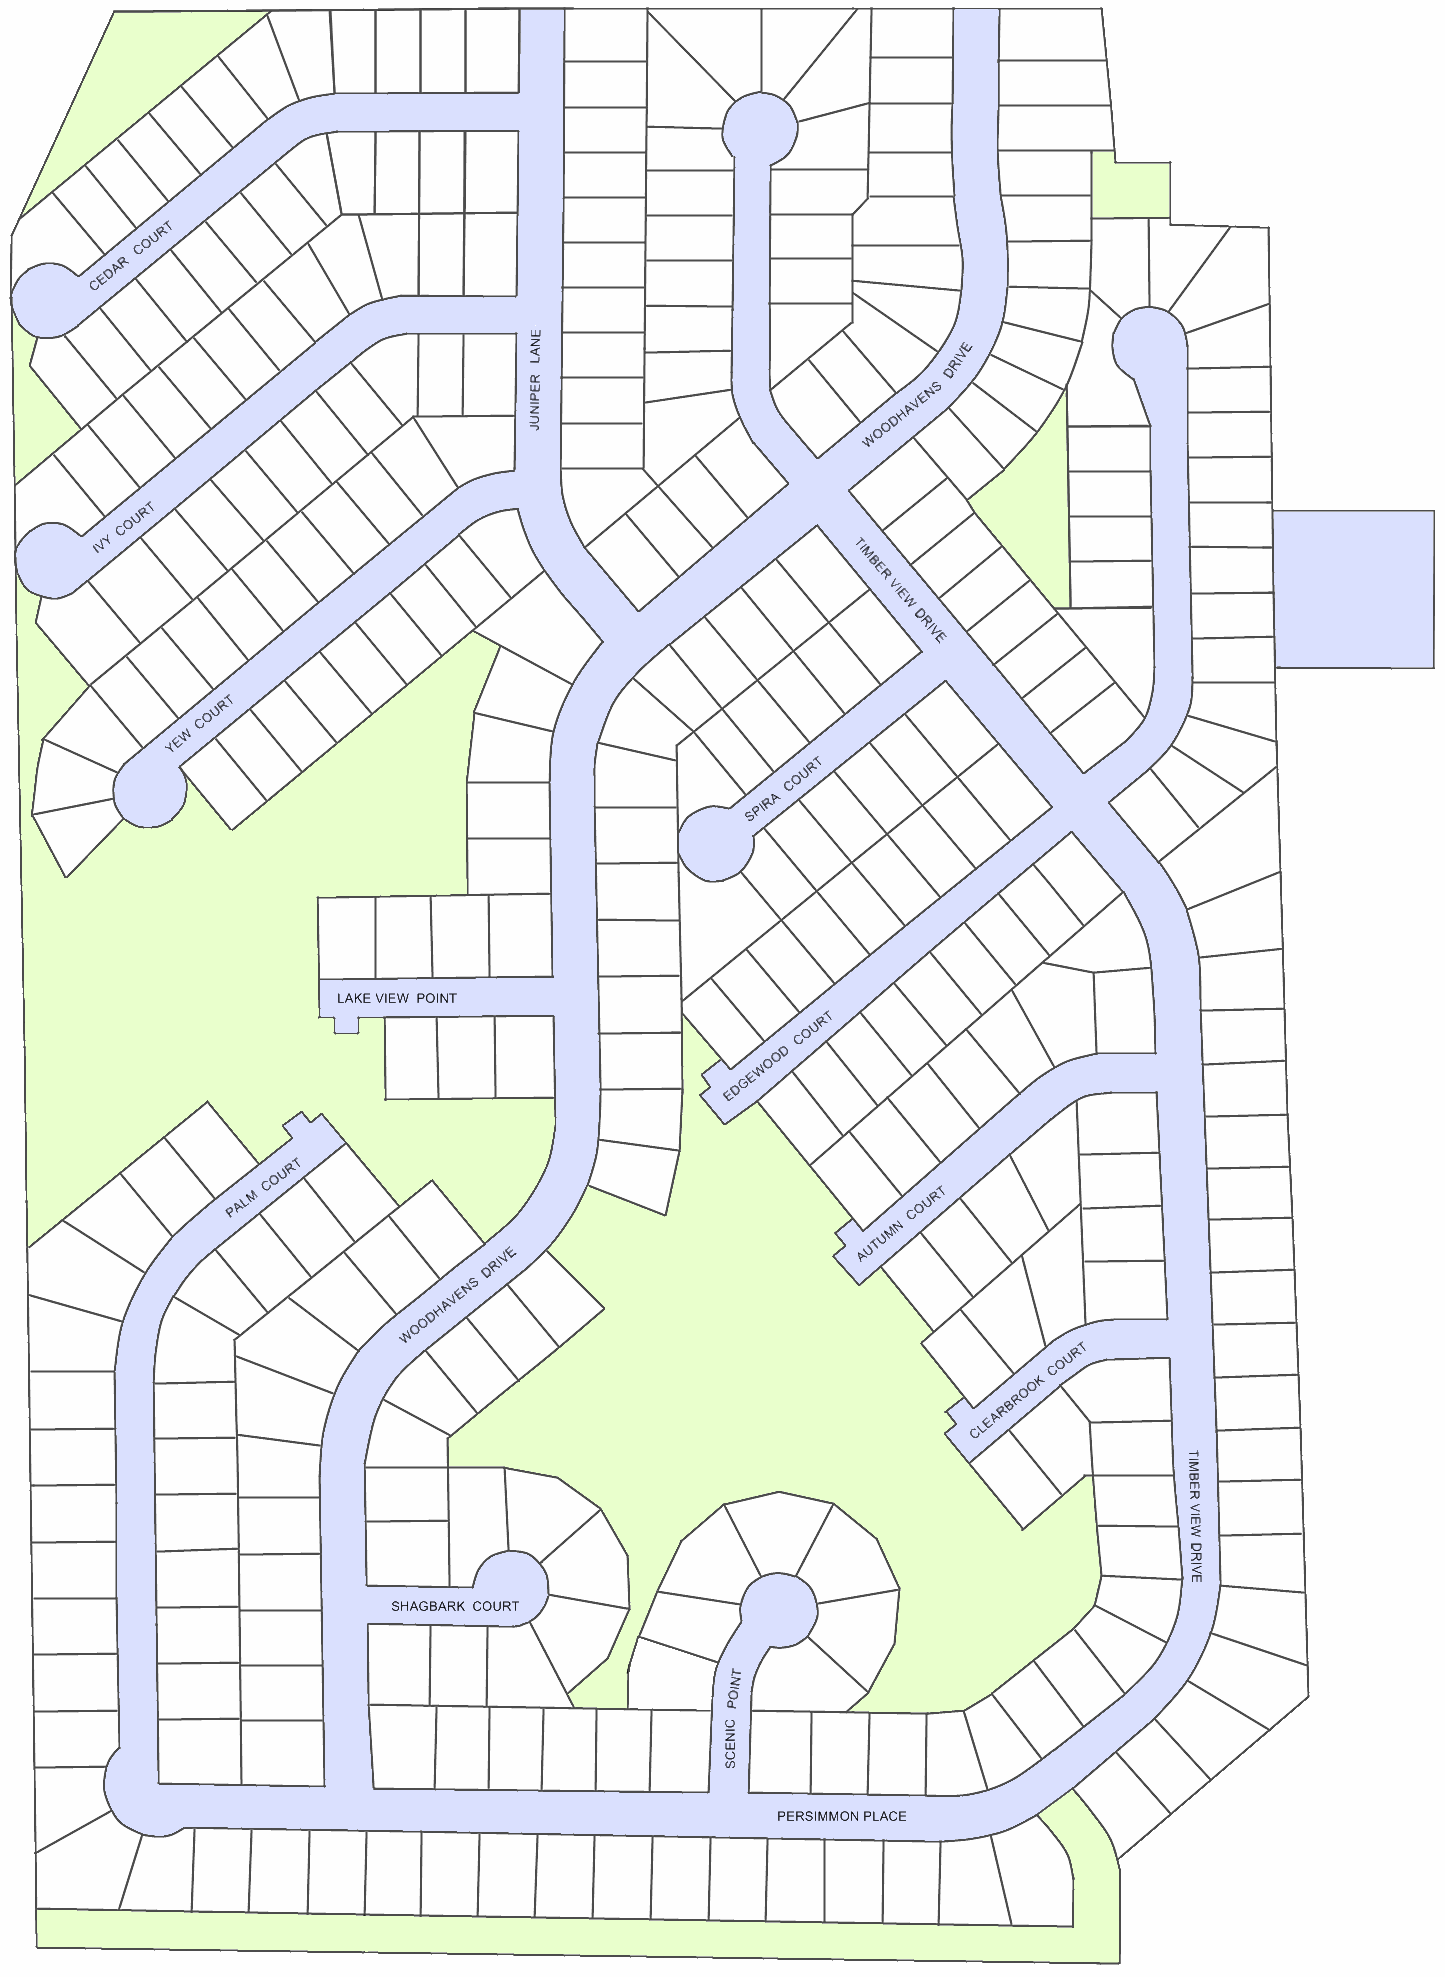 Subdivision map with photo markers